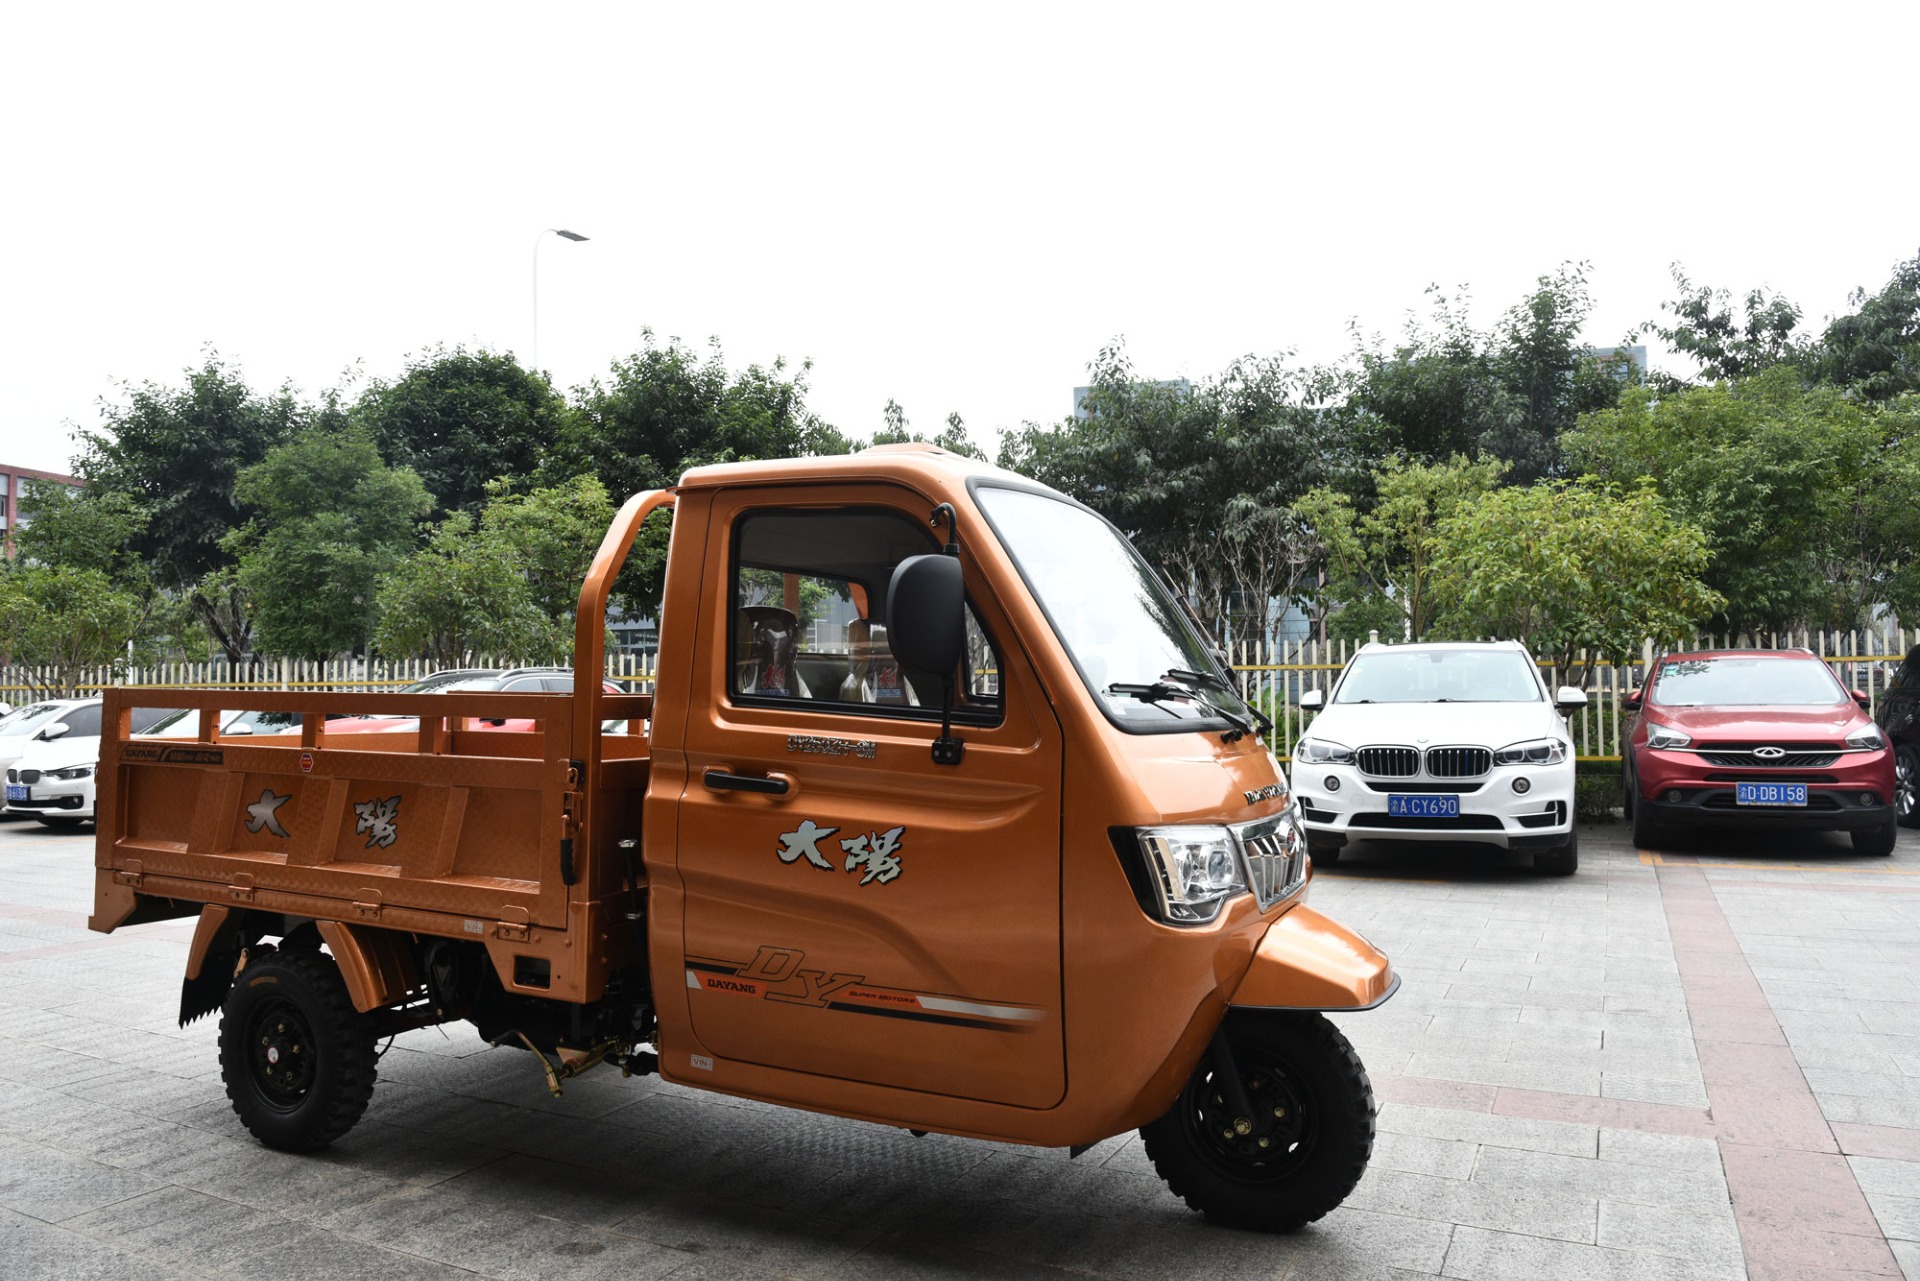 China beiYi DaYang tricycle with roof hot selling in 2015